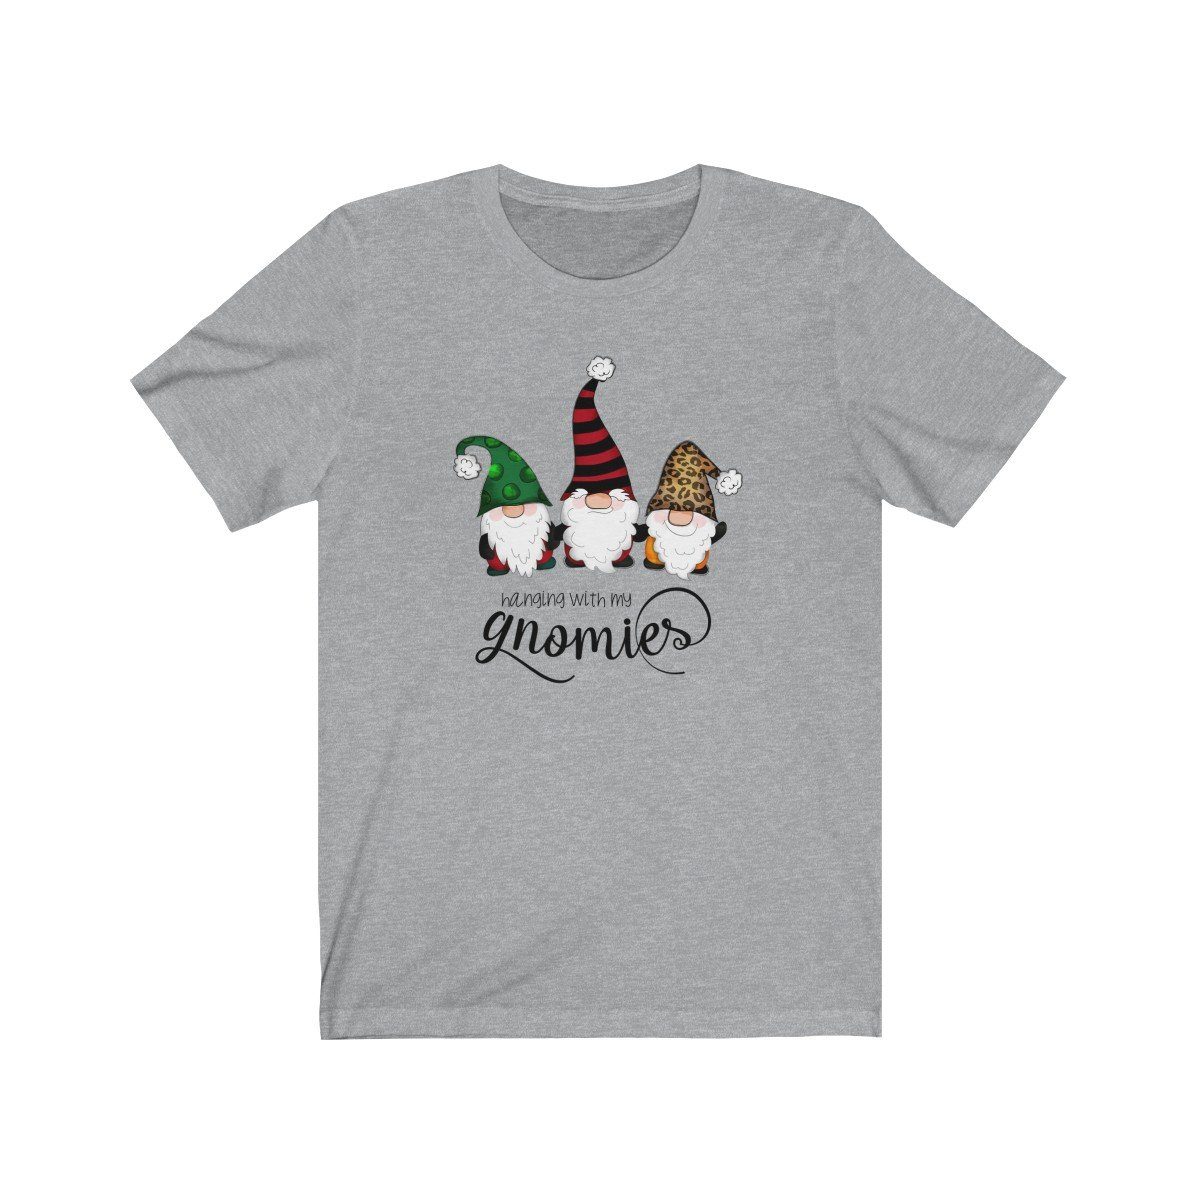 Hanging with my Gnomies Unisex T-shirt